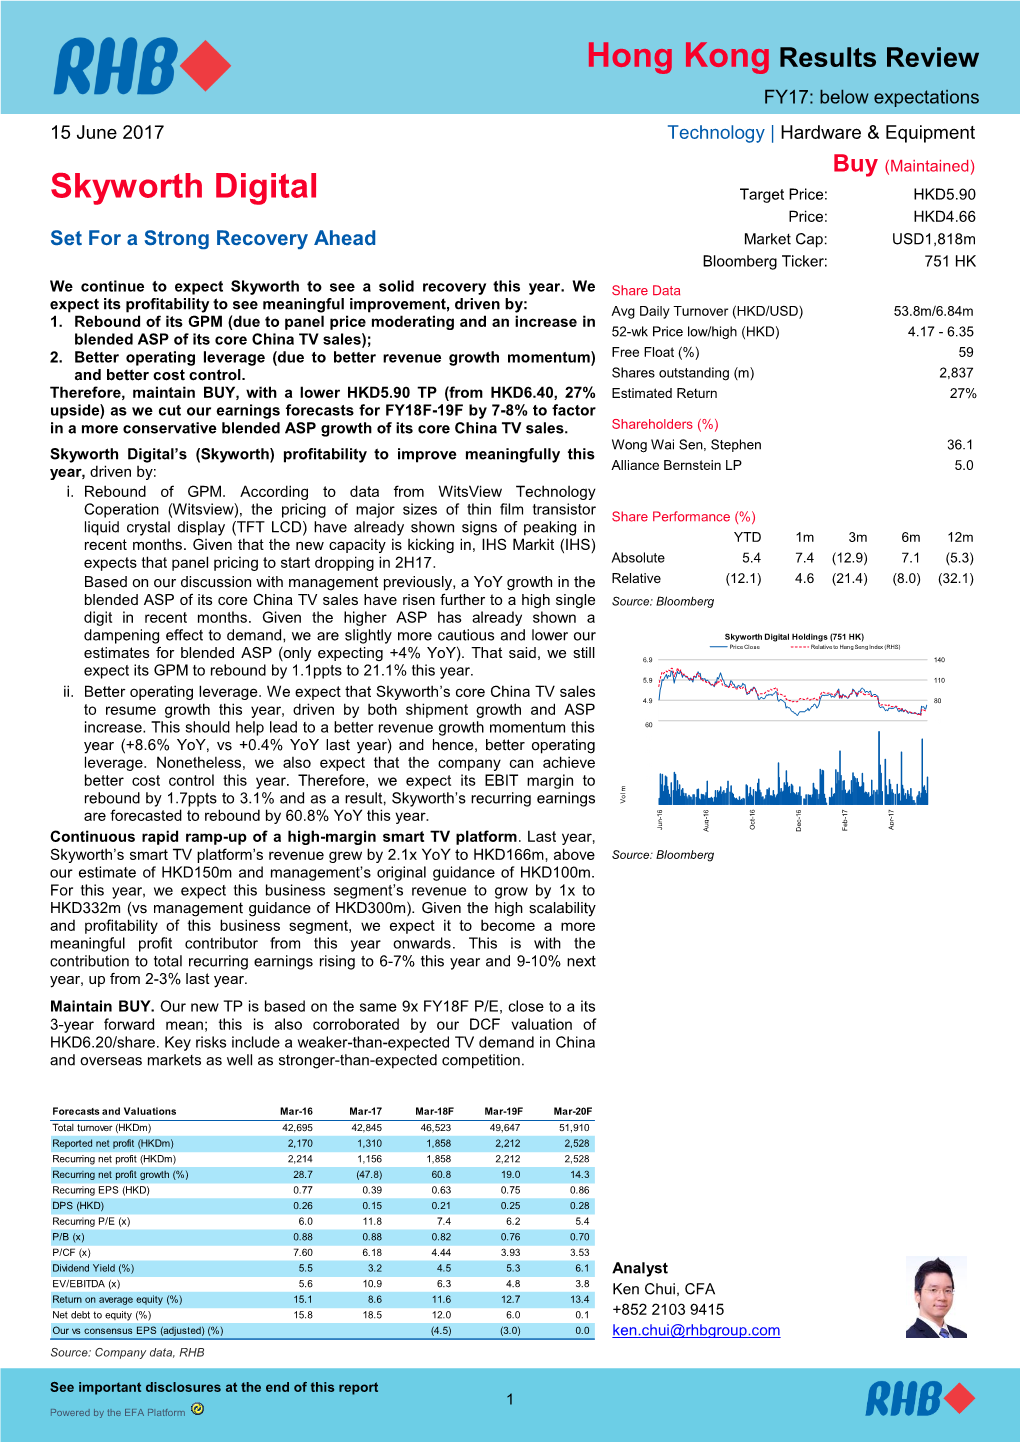 Skyworth Digital Target Price: HKD5.90 Price: HKD4.66 Set for a Strong Recovery Ahead Market Cap: USD1,818M Bloomberg Ticker: 751 HK